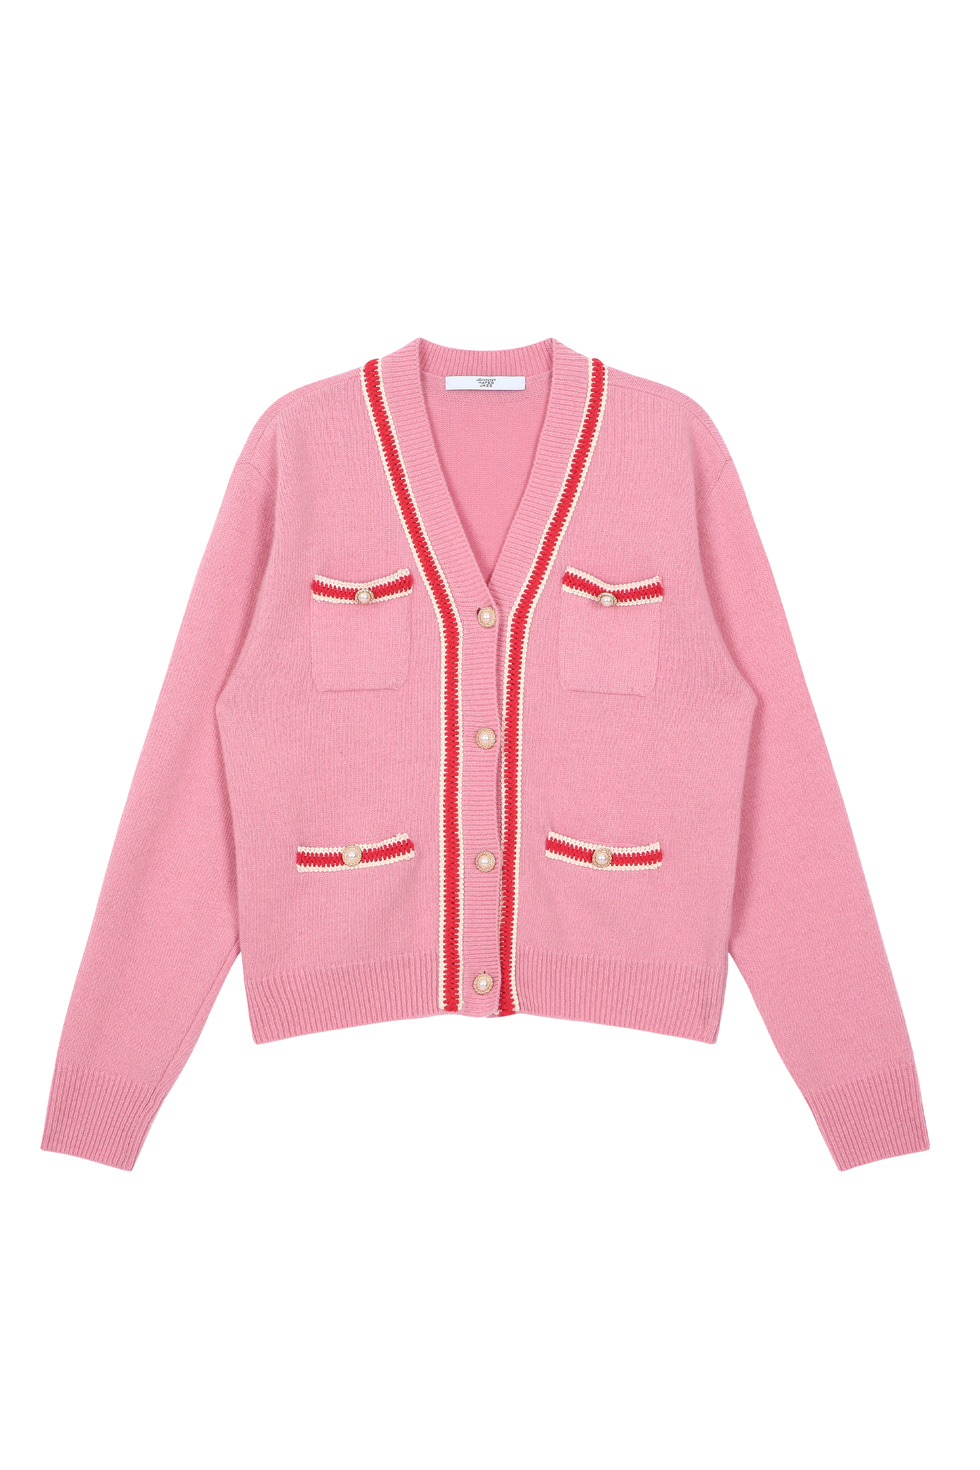 PEARL BUTTON CARDIGAN - PINK